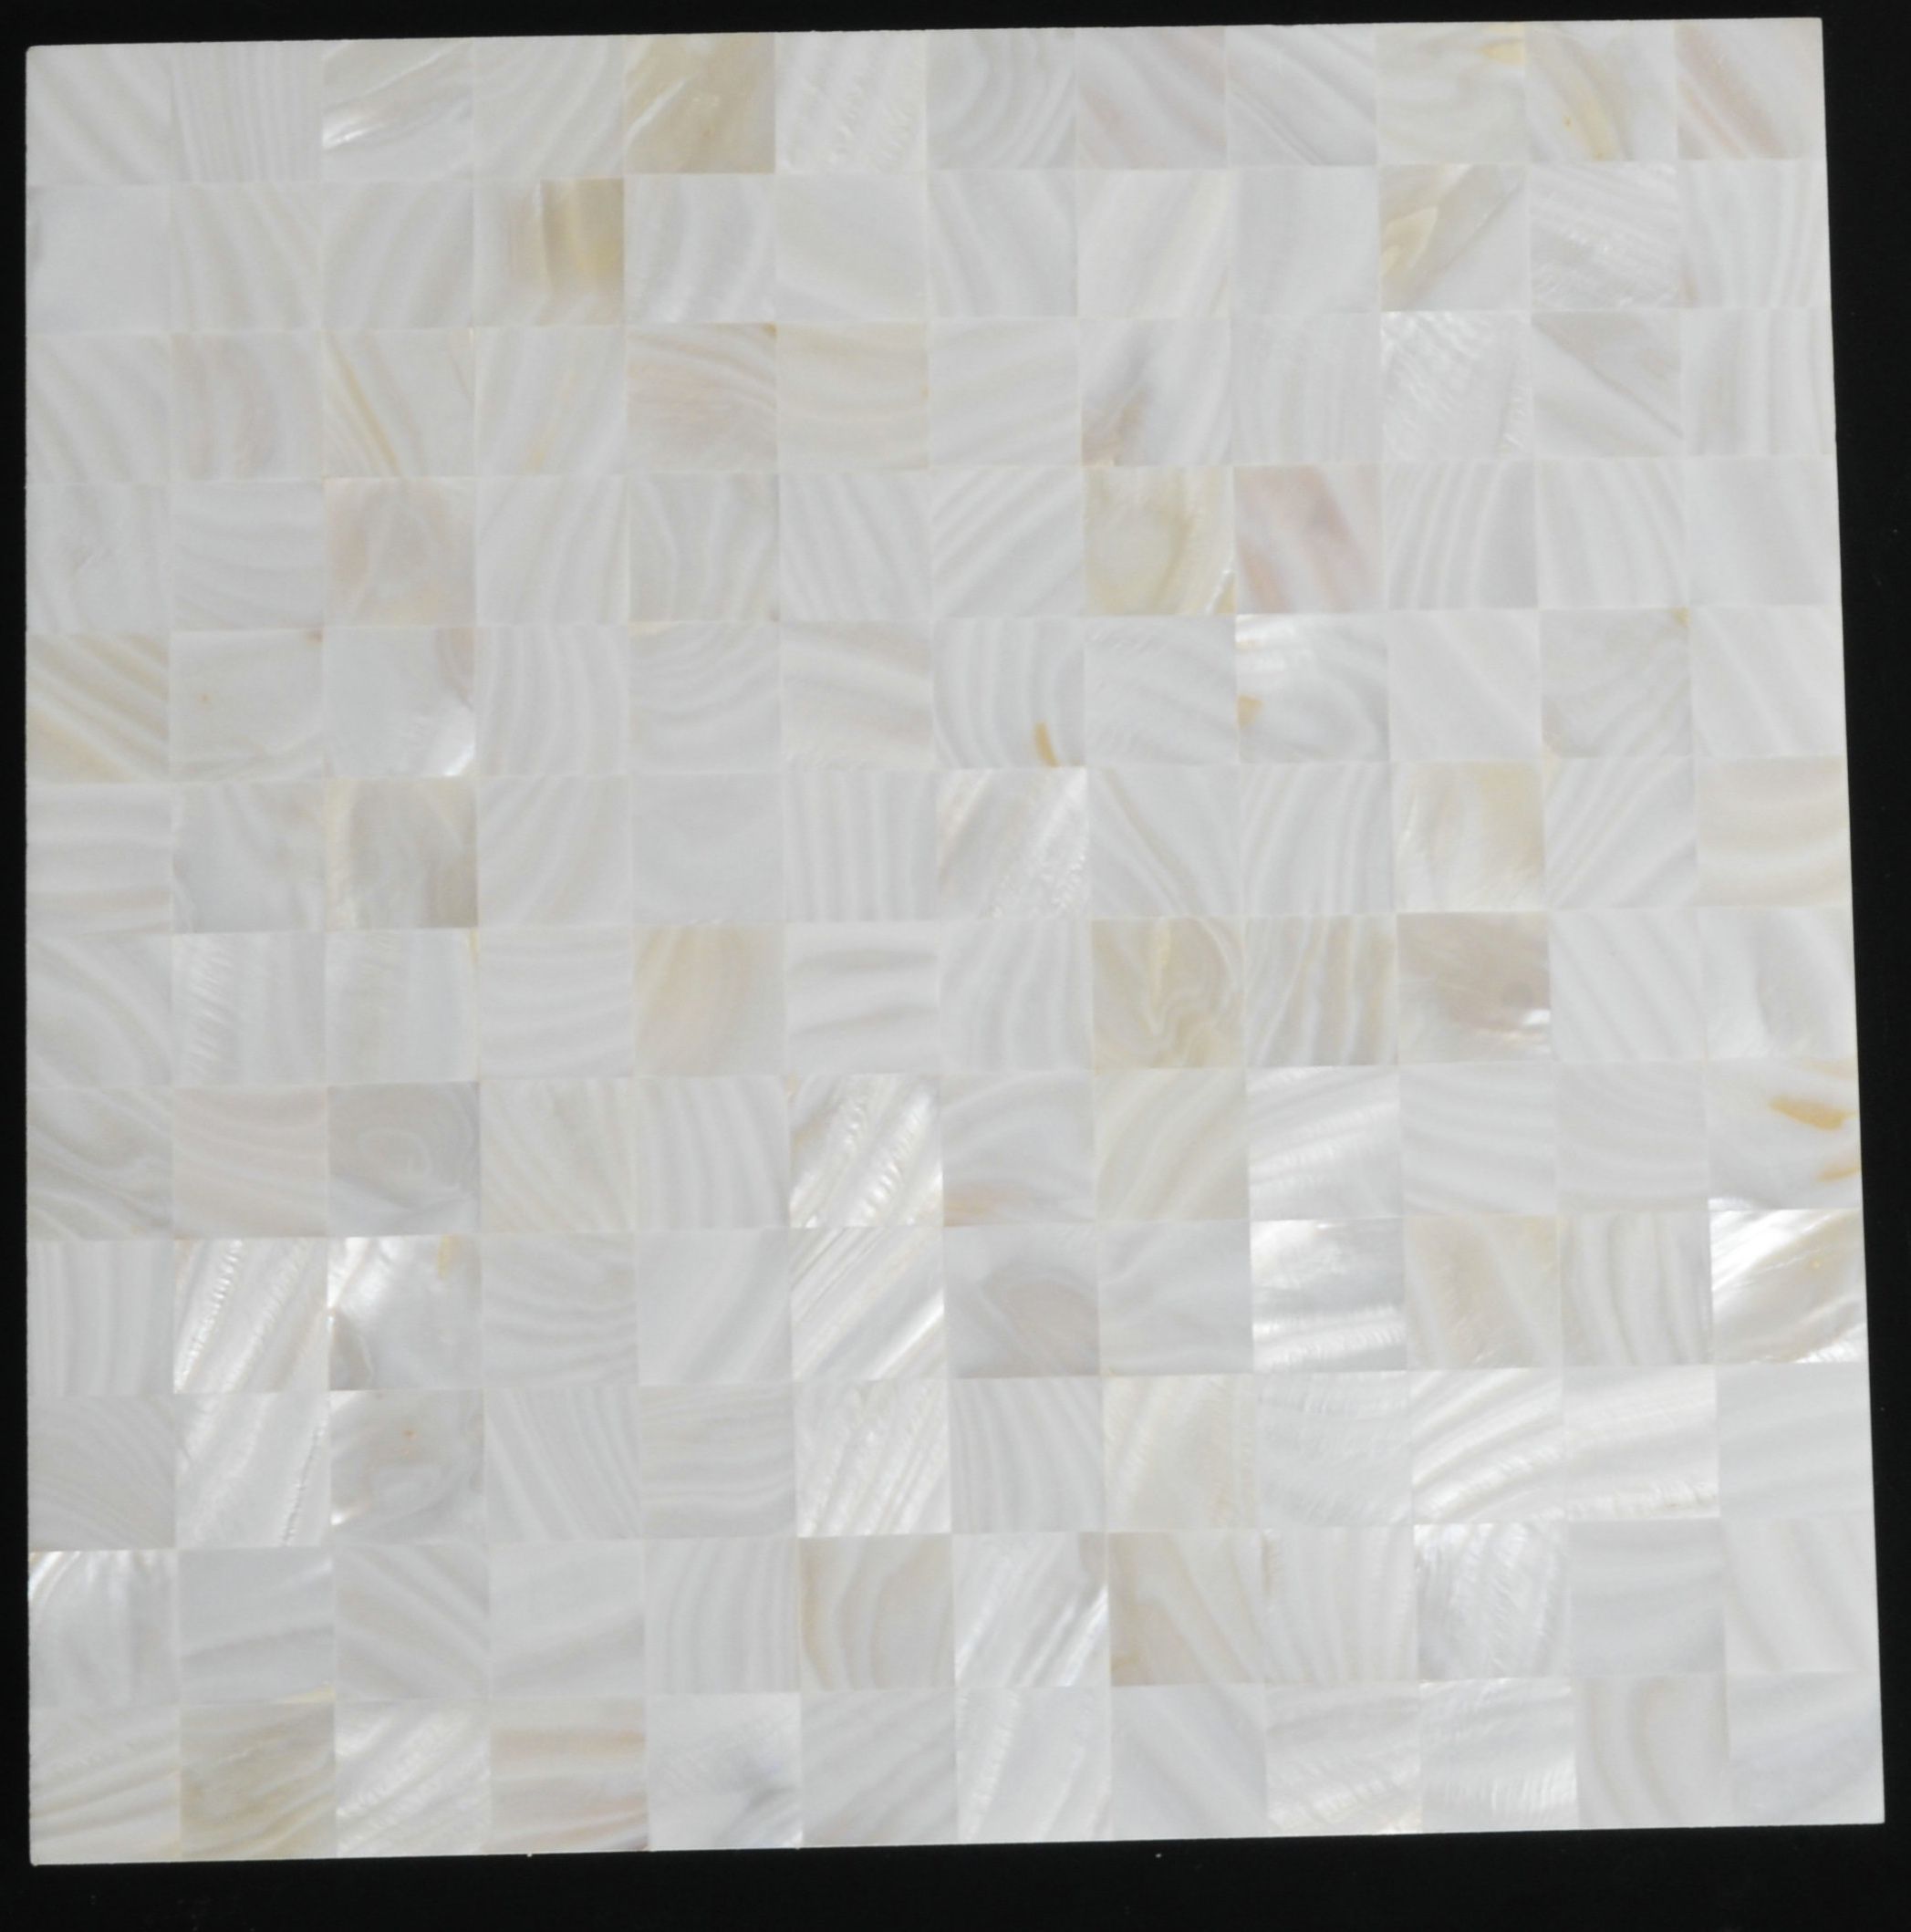 2020 8mm Thickness 1x1 Inch White Groutless Mother Of Pearl Mosaic